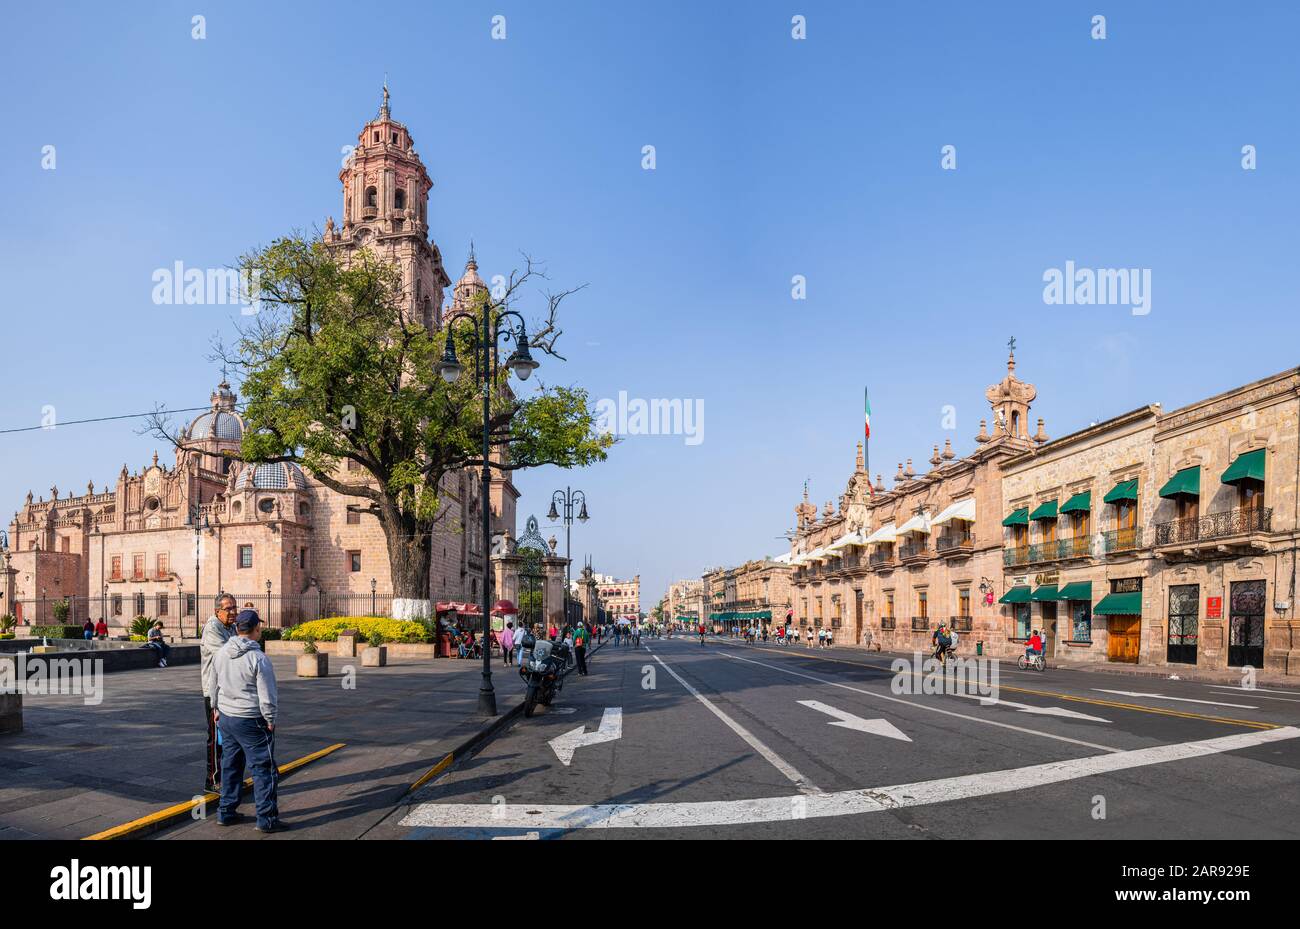 Morelia, Michoacan, Mexico - November 24, 2019: The Morelia Cathedral as seen from Mexico 15, and the Government Palace, people running and riding bik Stock Photo